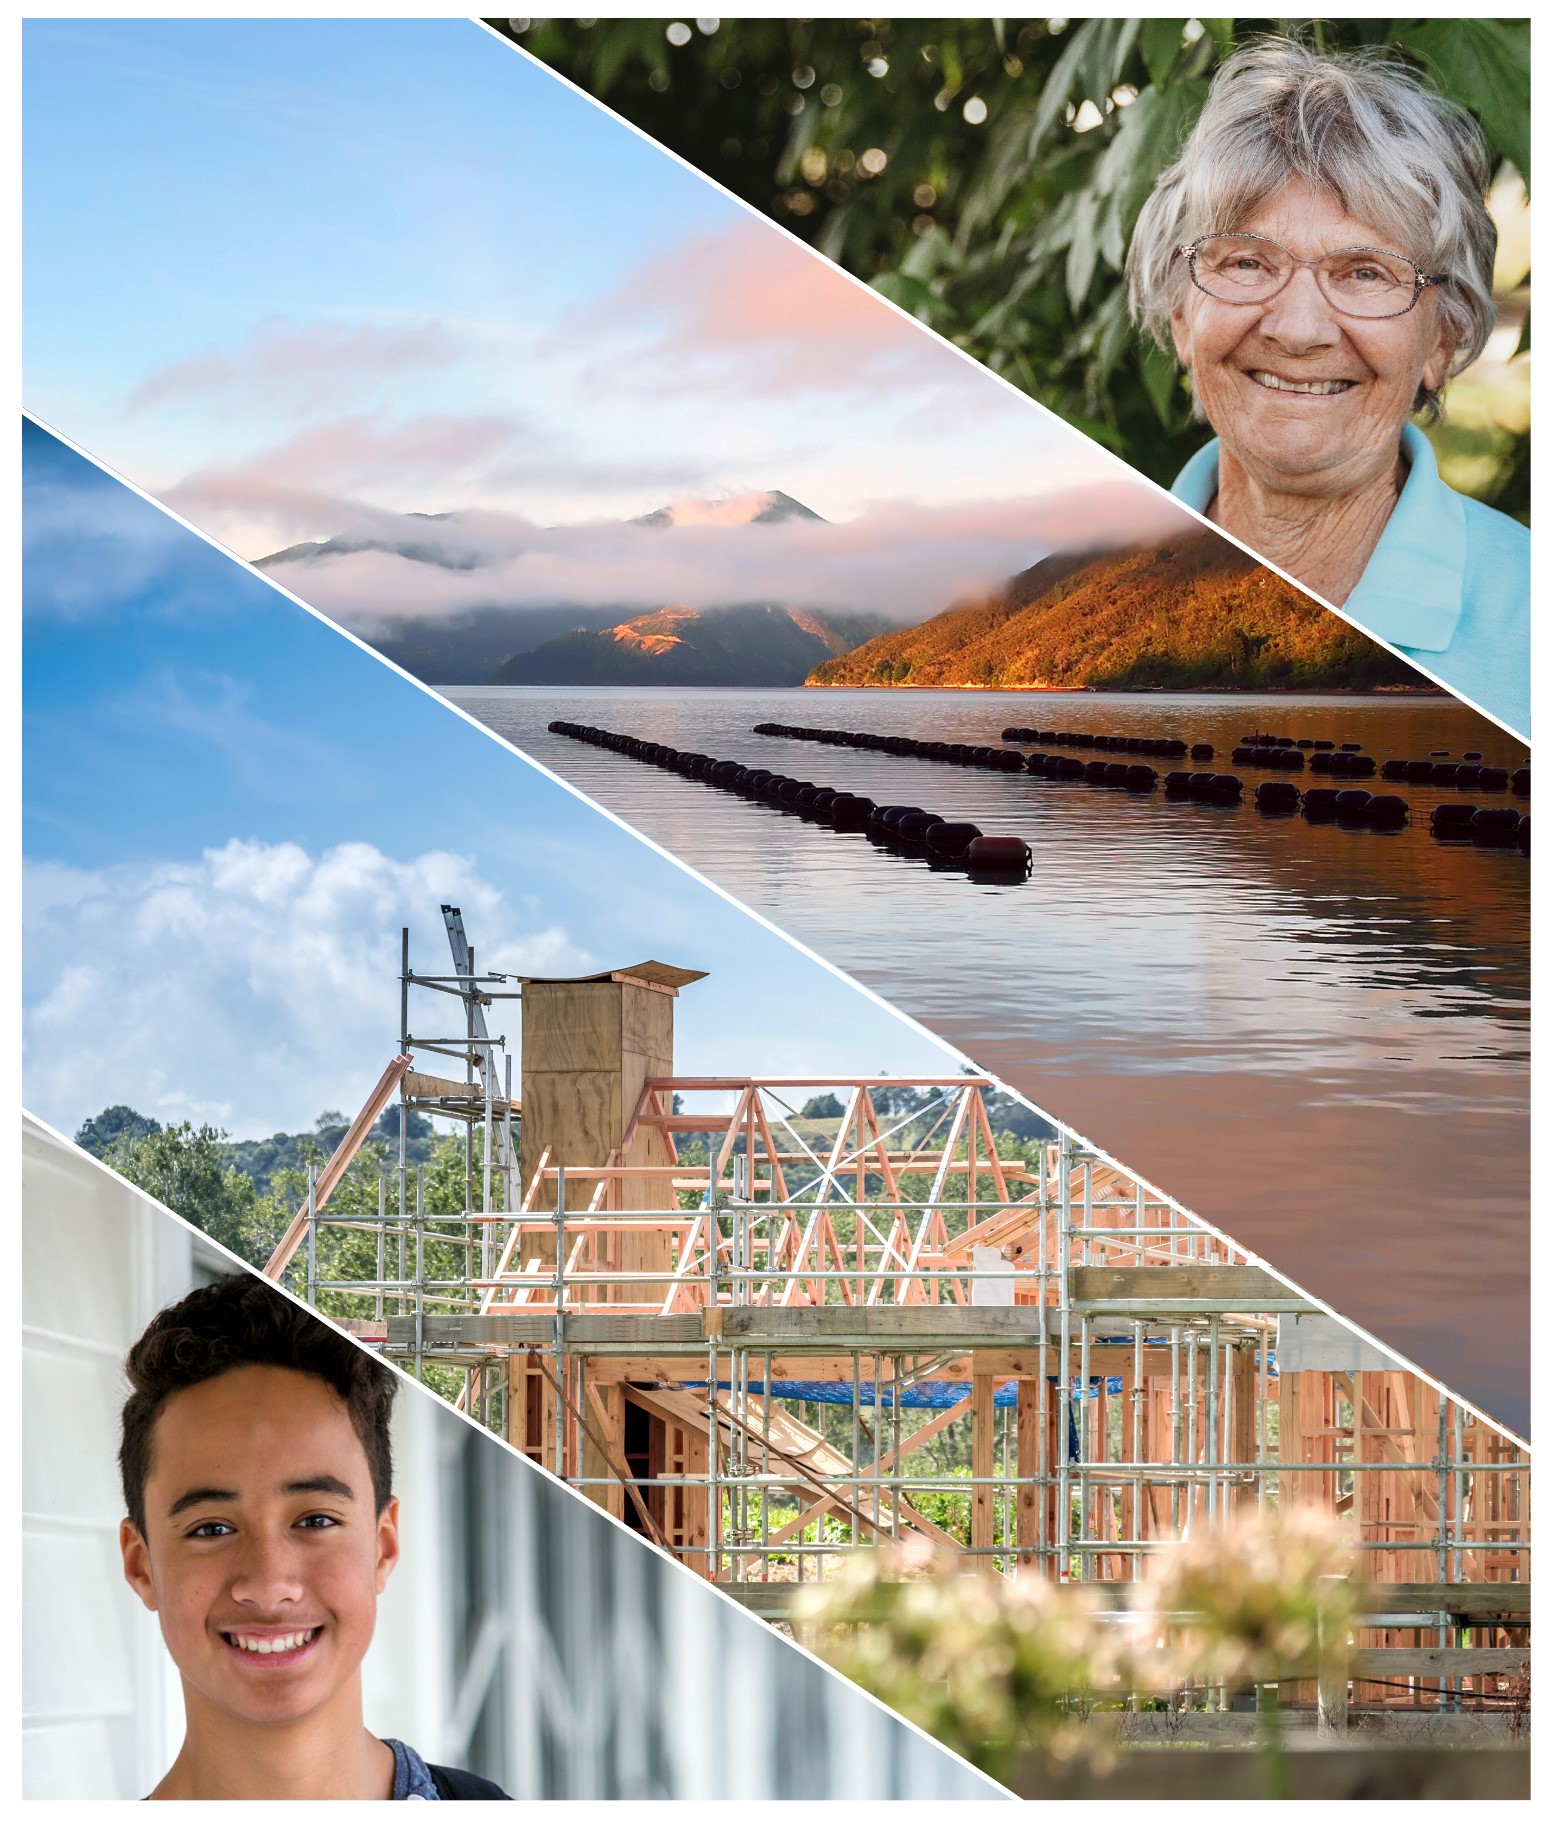 Slices of 4 photos. 1 - Older woman smiling. 2 - Aquaculture farm. 3 - building site. 4 - young person smiling. 